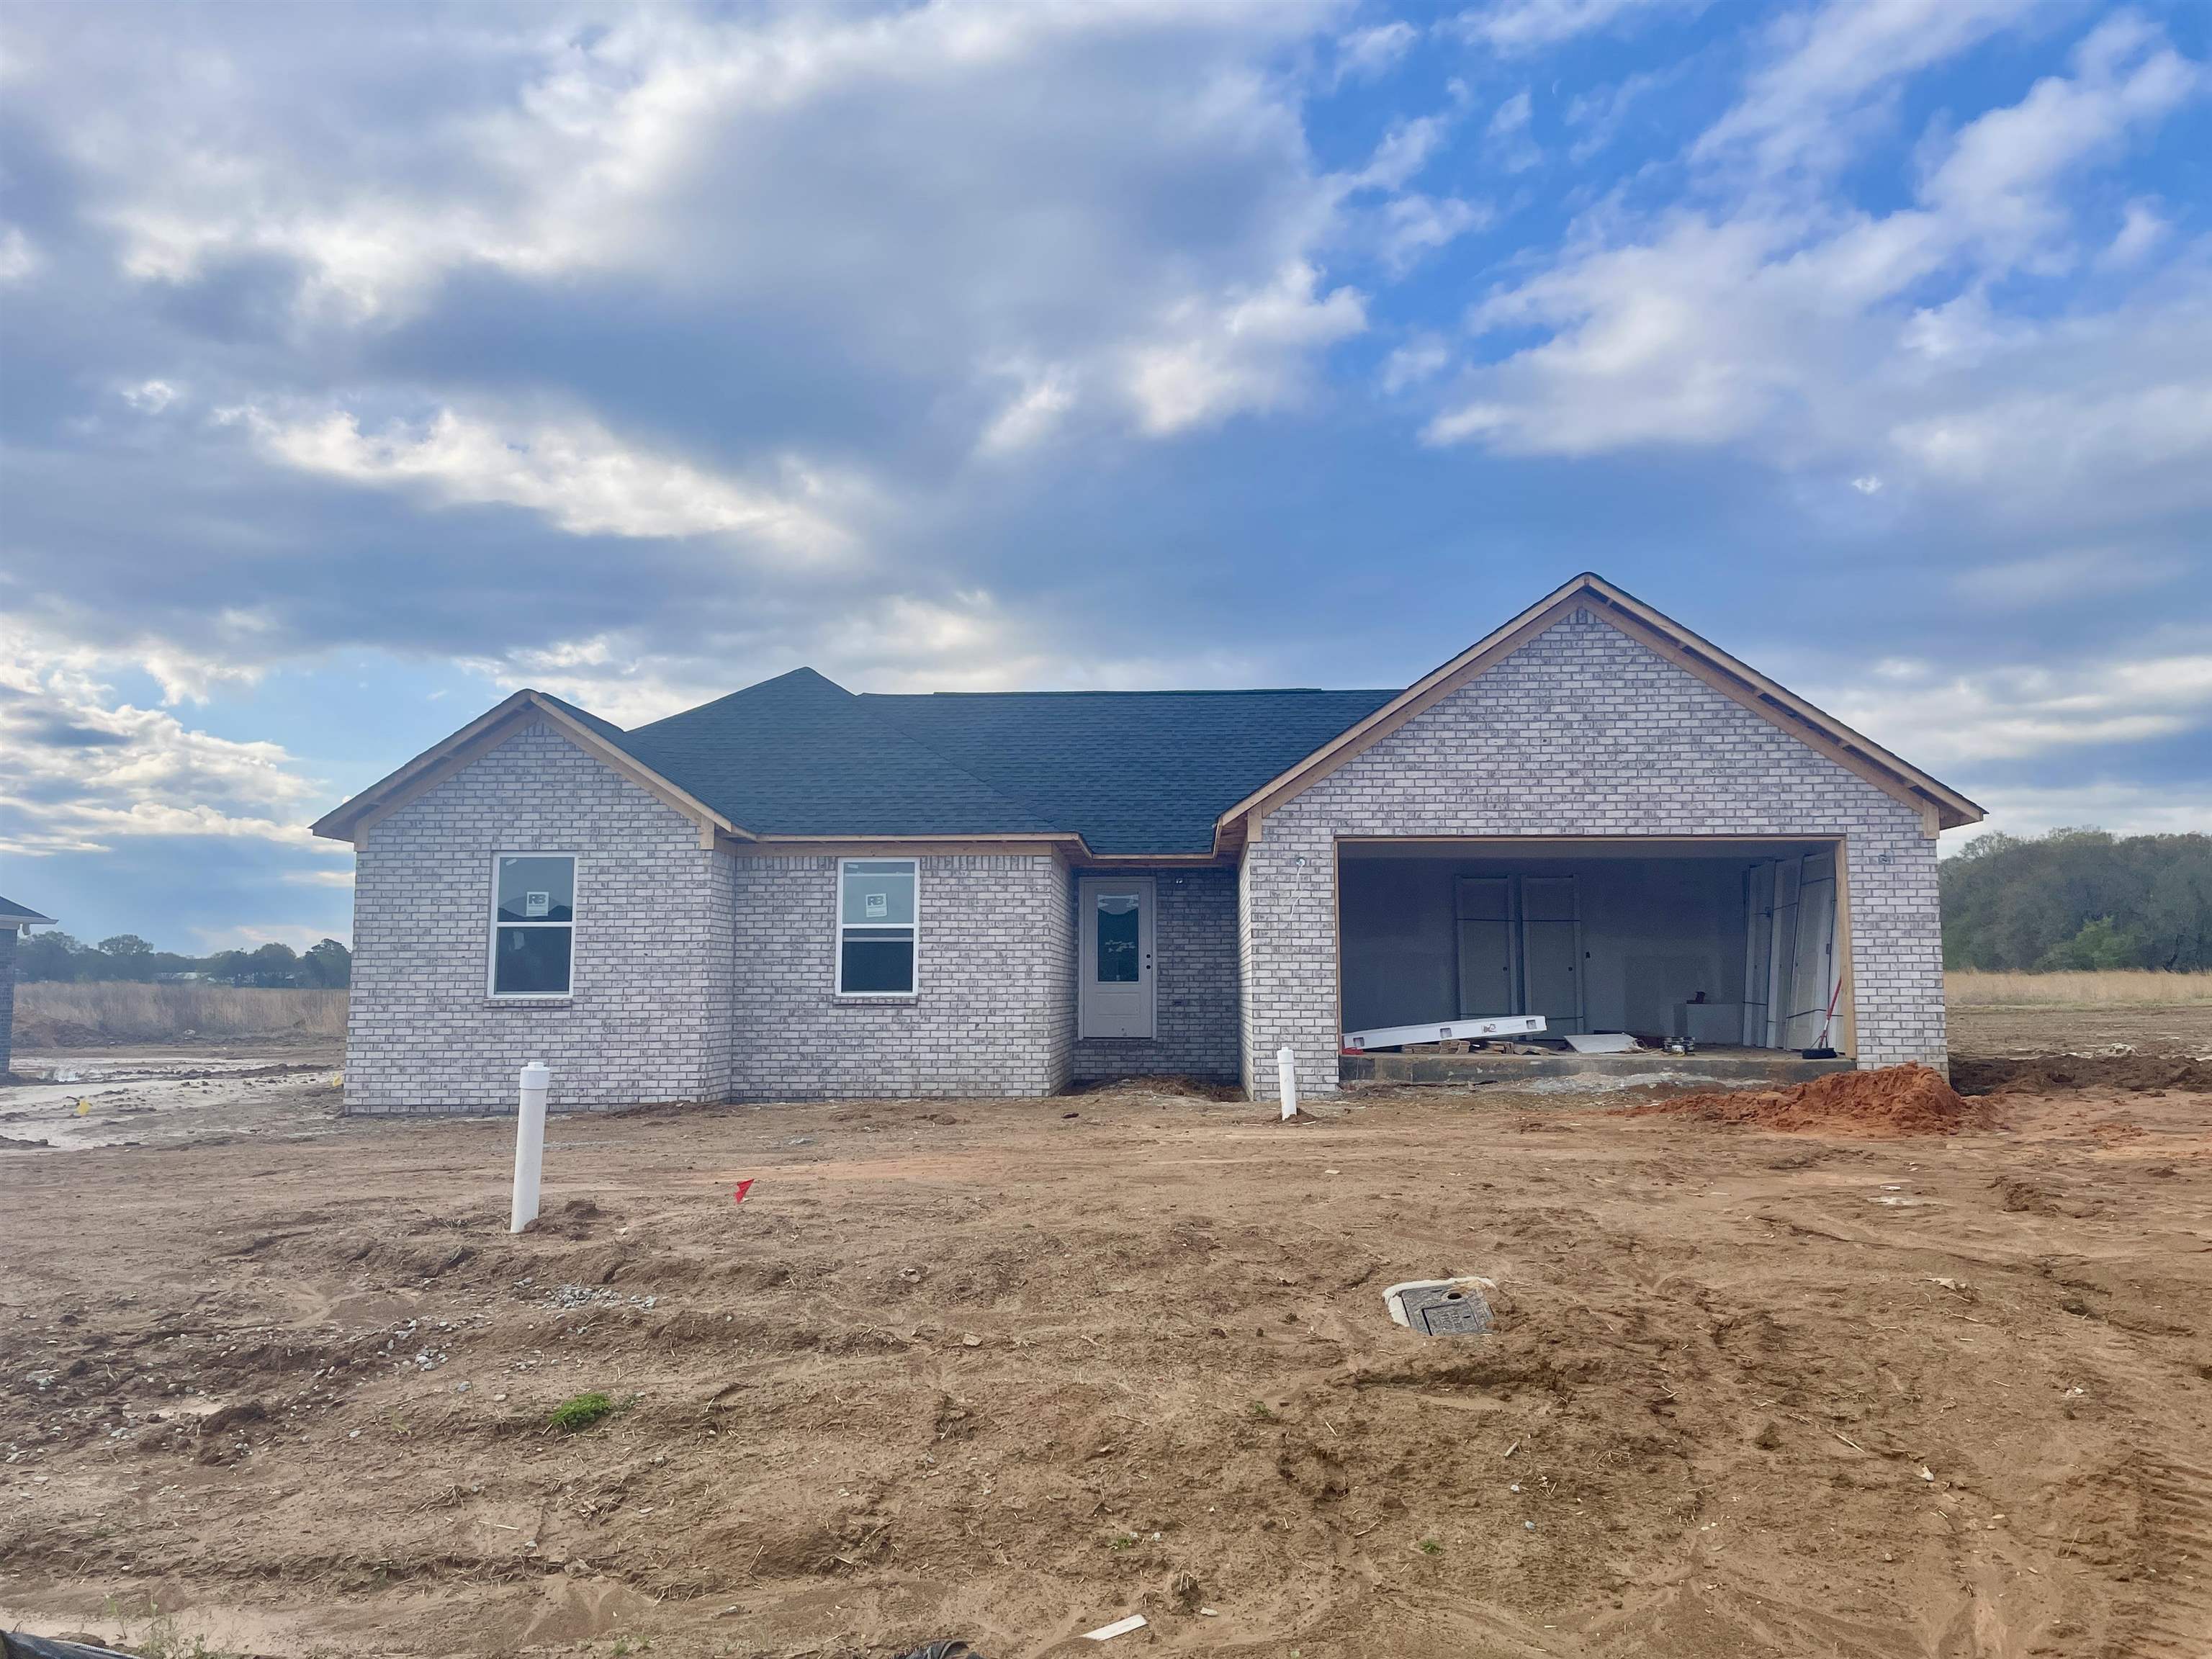 14010 Westhaven Cove, Milan, TN 